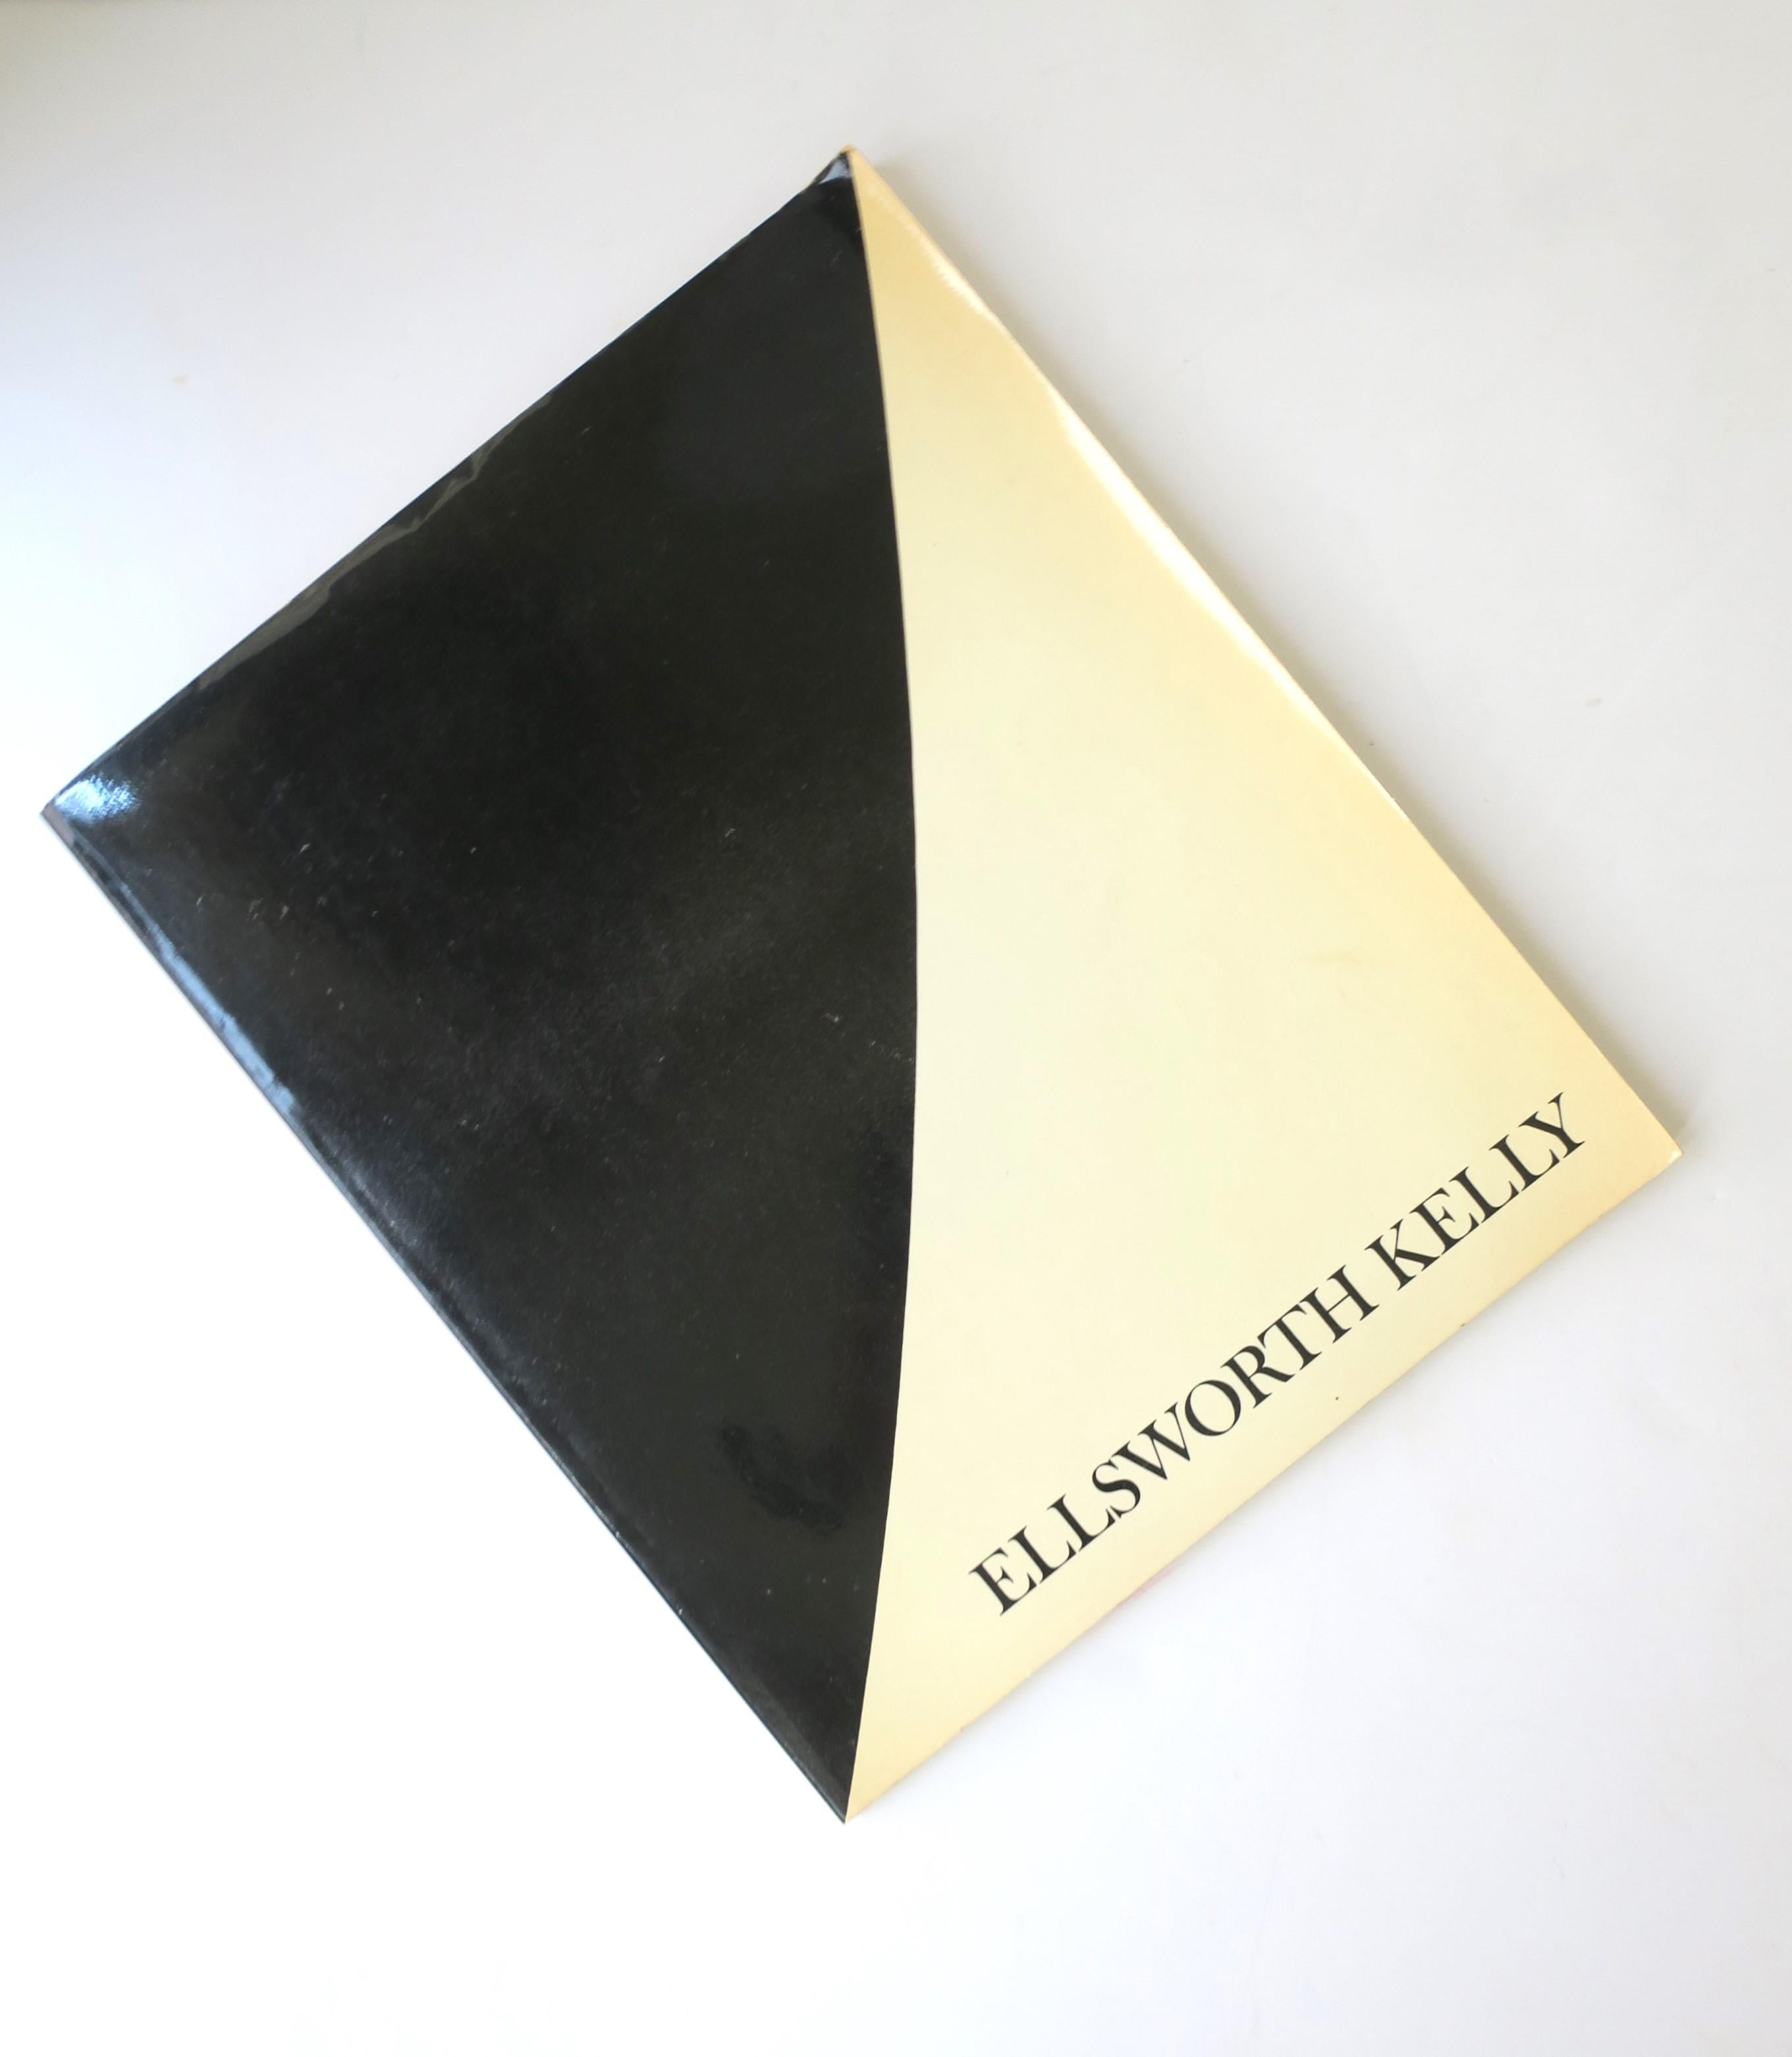 An Ellsworth Kelly exhibition catalog book from the Museum of Modern Art, New York, New York, 1973. Exhibition covers the Army, Boston, Paris, and New York years, as well as the 'plant' drawings. A great piece to collect or add to an existing